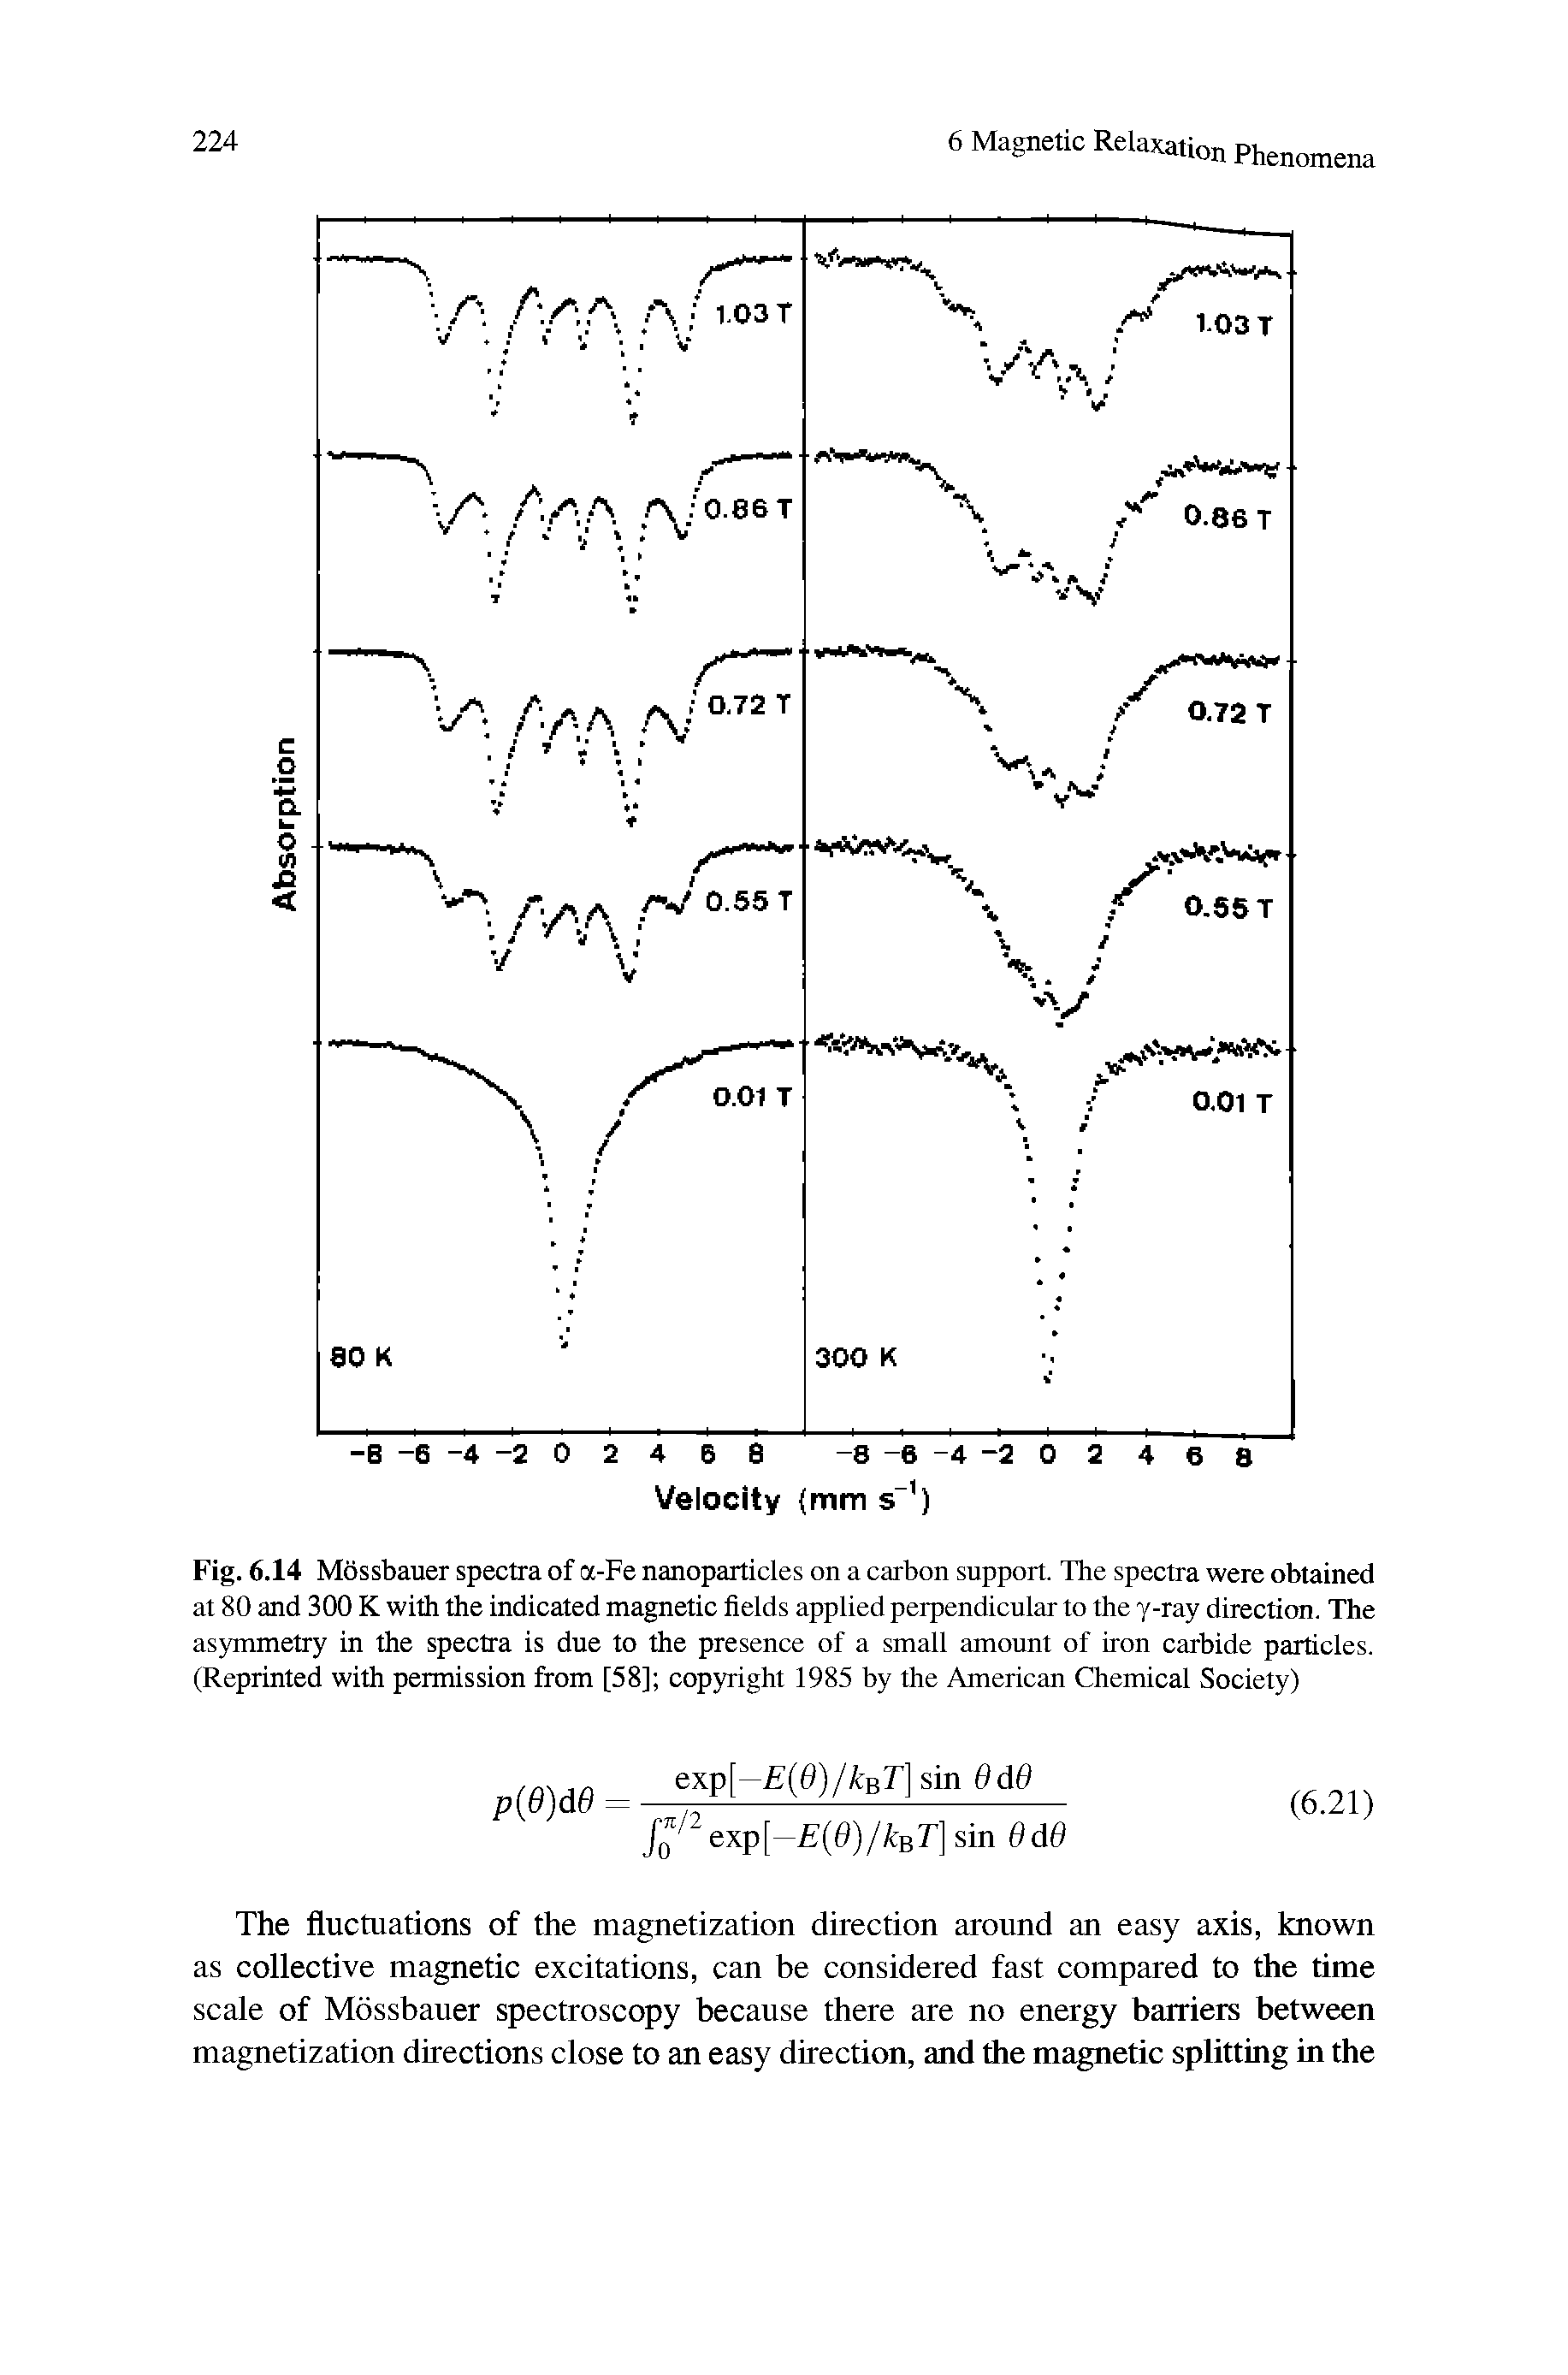 Fig. 6.14 Mossbauer spectra of a-Fe nanoparticles on a carbon support. The spectra were obtained at 80 and 300 K with the indicated magnetic fields applied perpendicular to the y-ray direction. The asymmetry in the spectra is due to the presence of a small amount of iron carbide particles. (Reprinted with permission from [58] copyright 1985 by the American Chemical Society)...